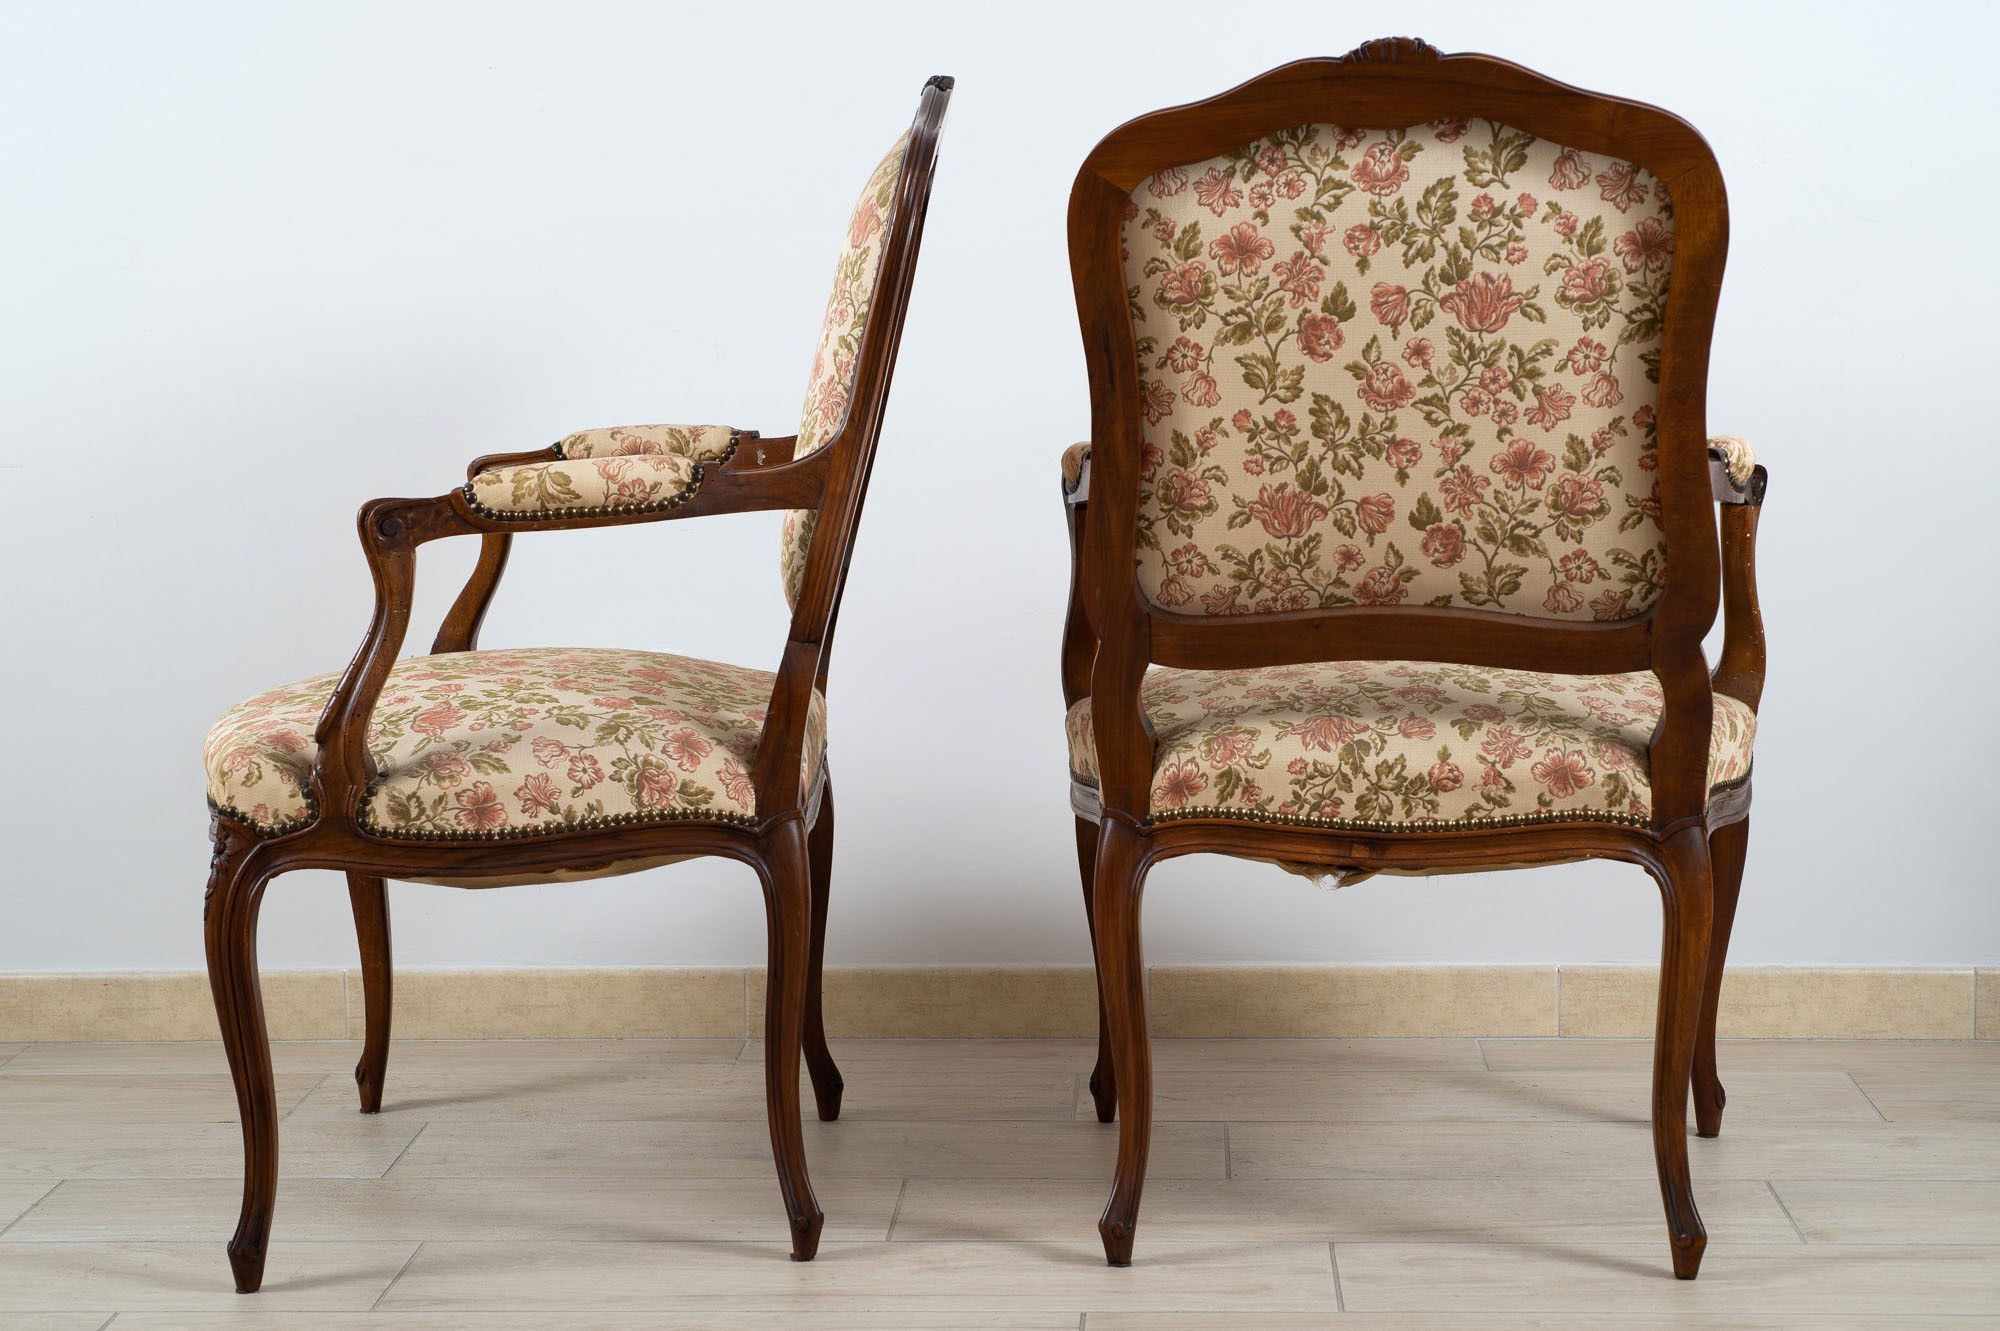 Pair of Louis XV style walnut armchairs - Image 5 of 5